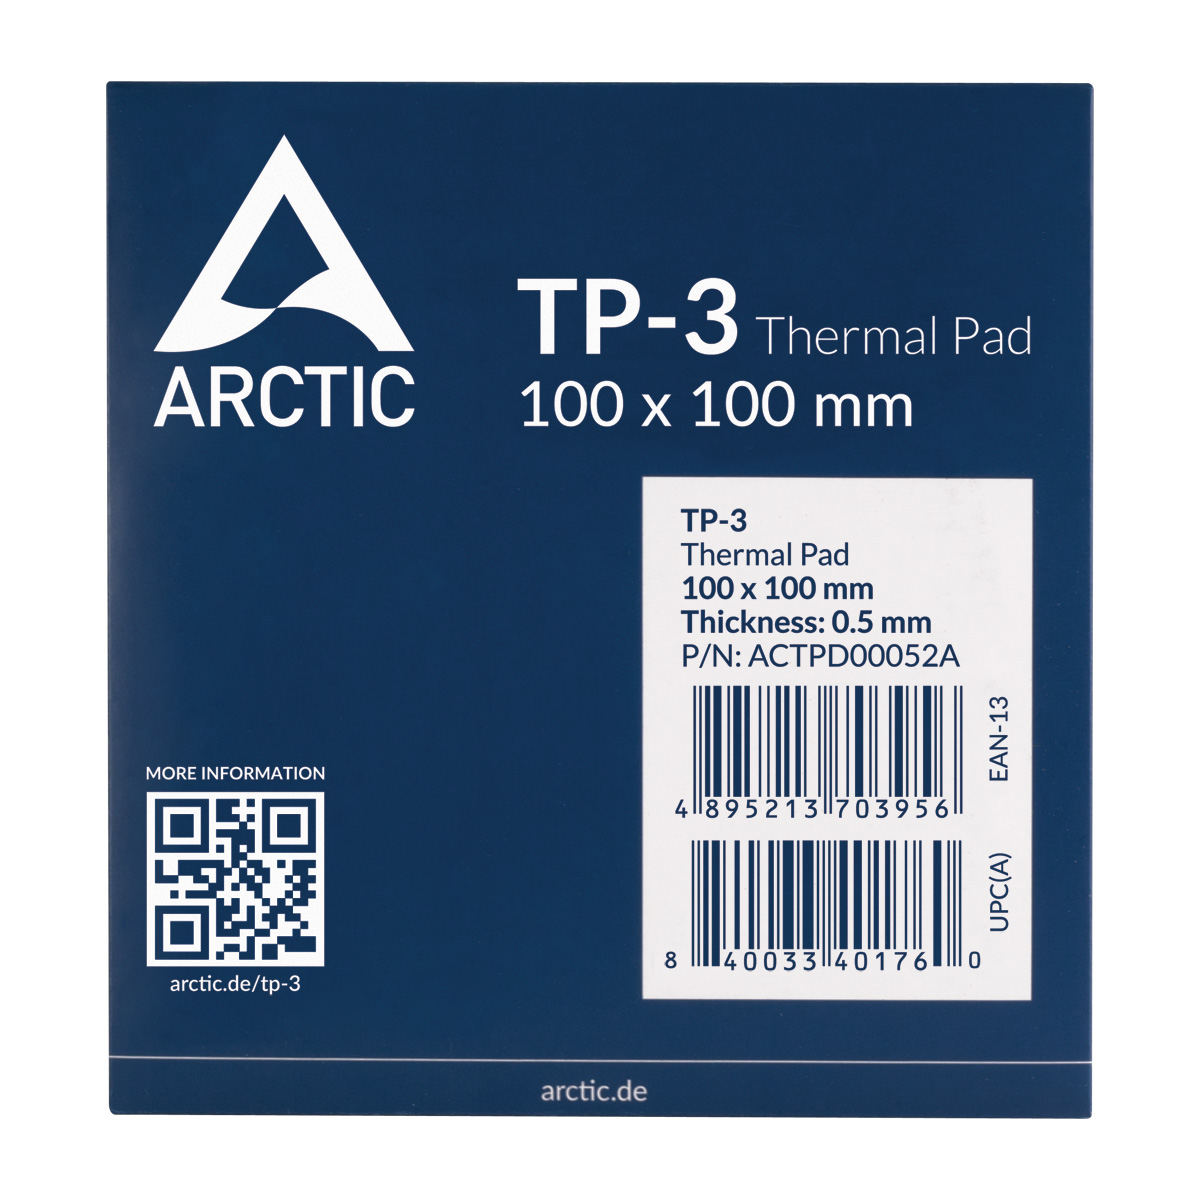 TP-3_100x100mm_0.5mm_Packaging